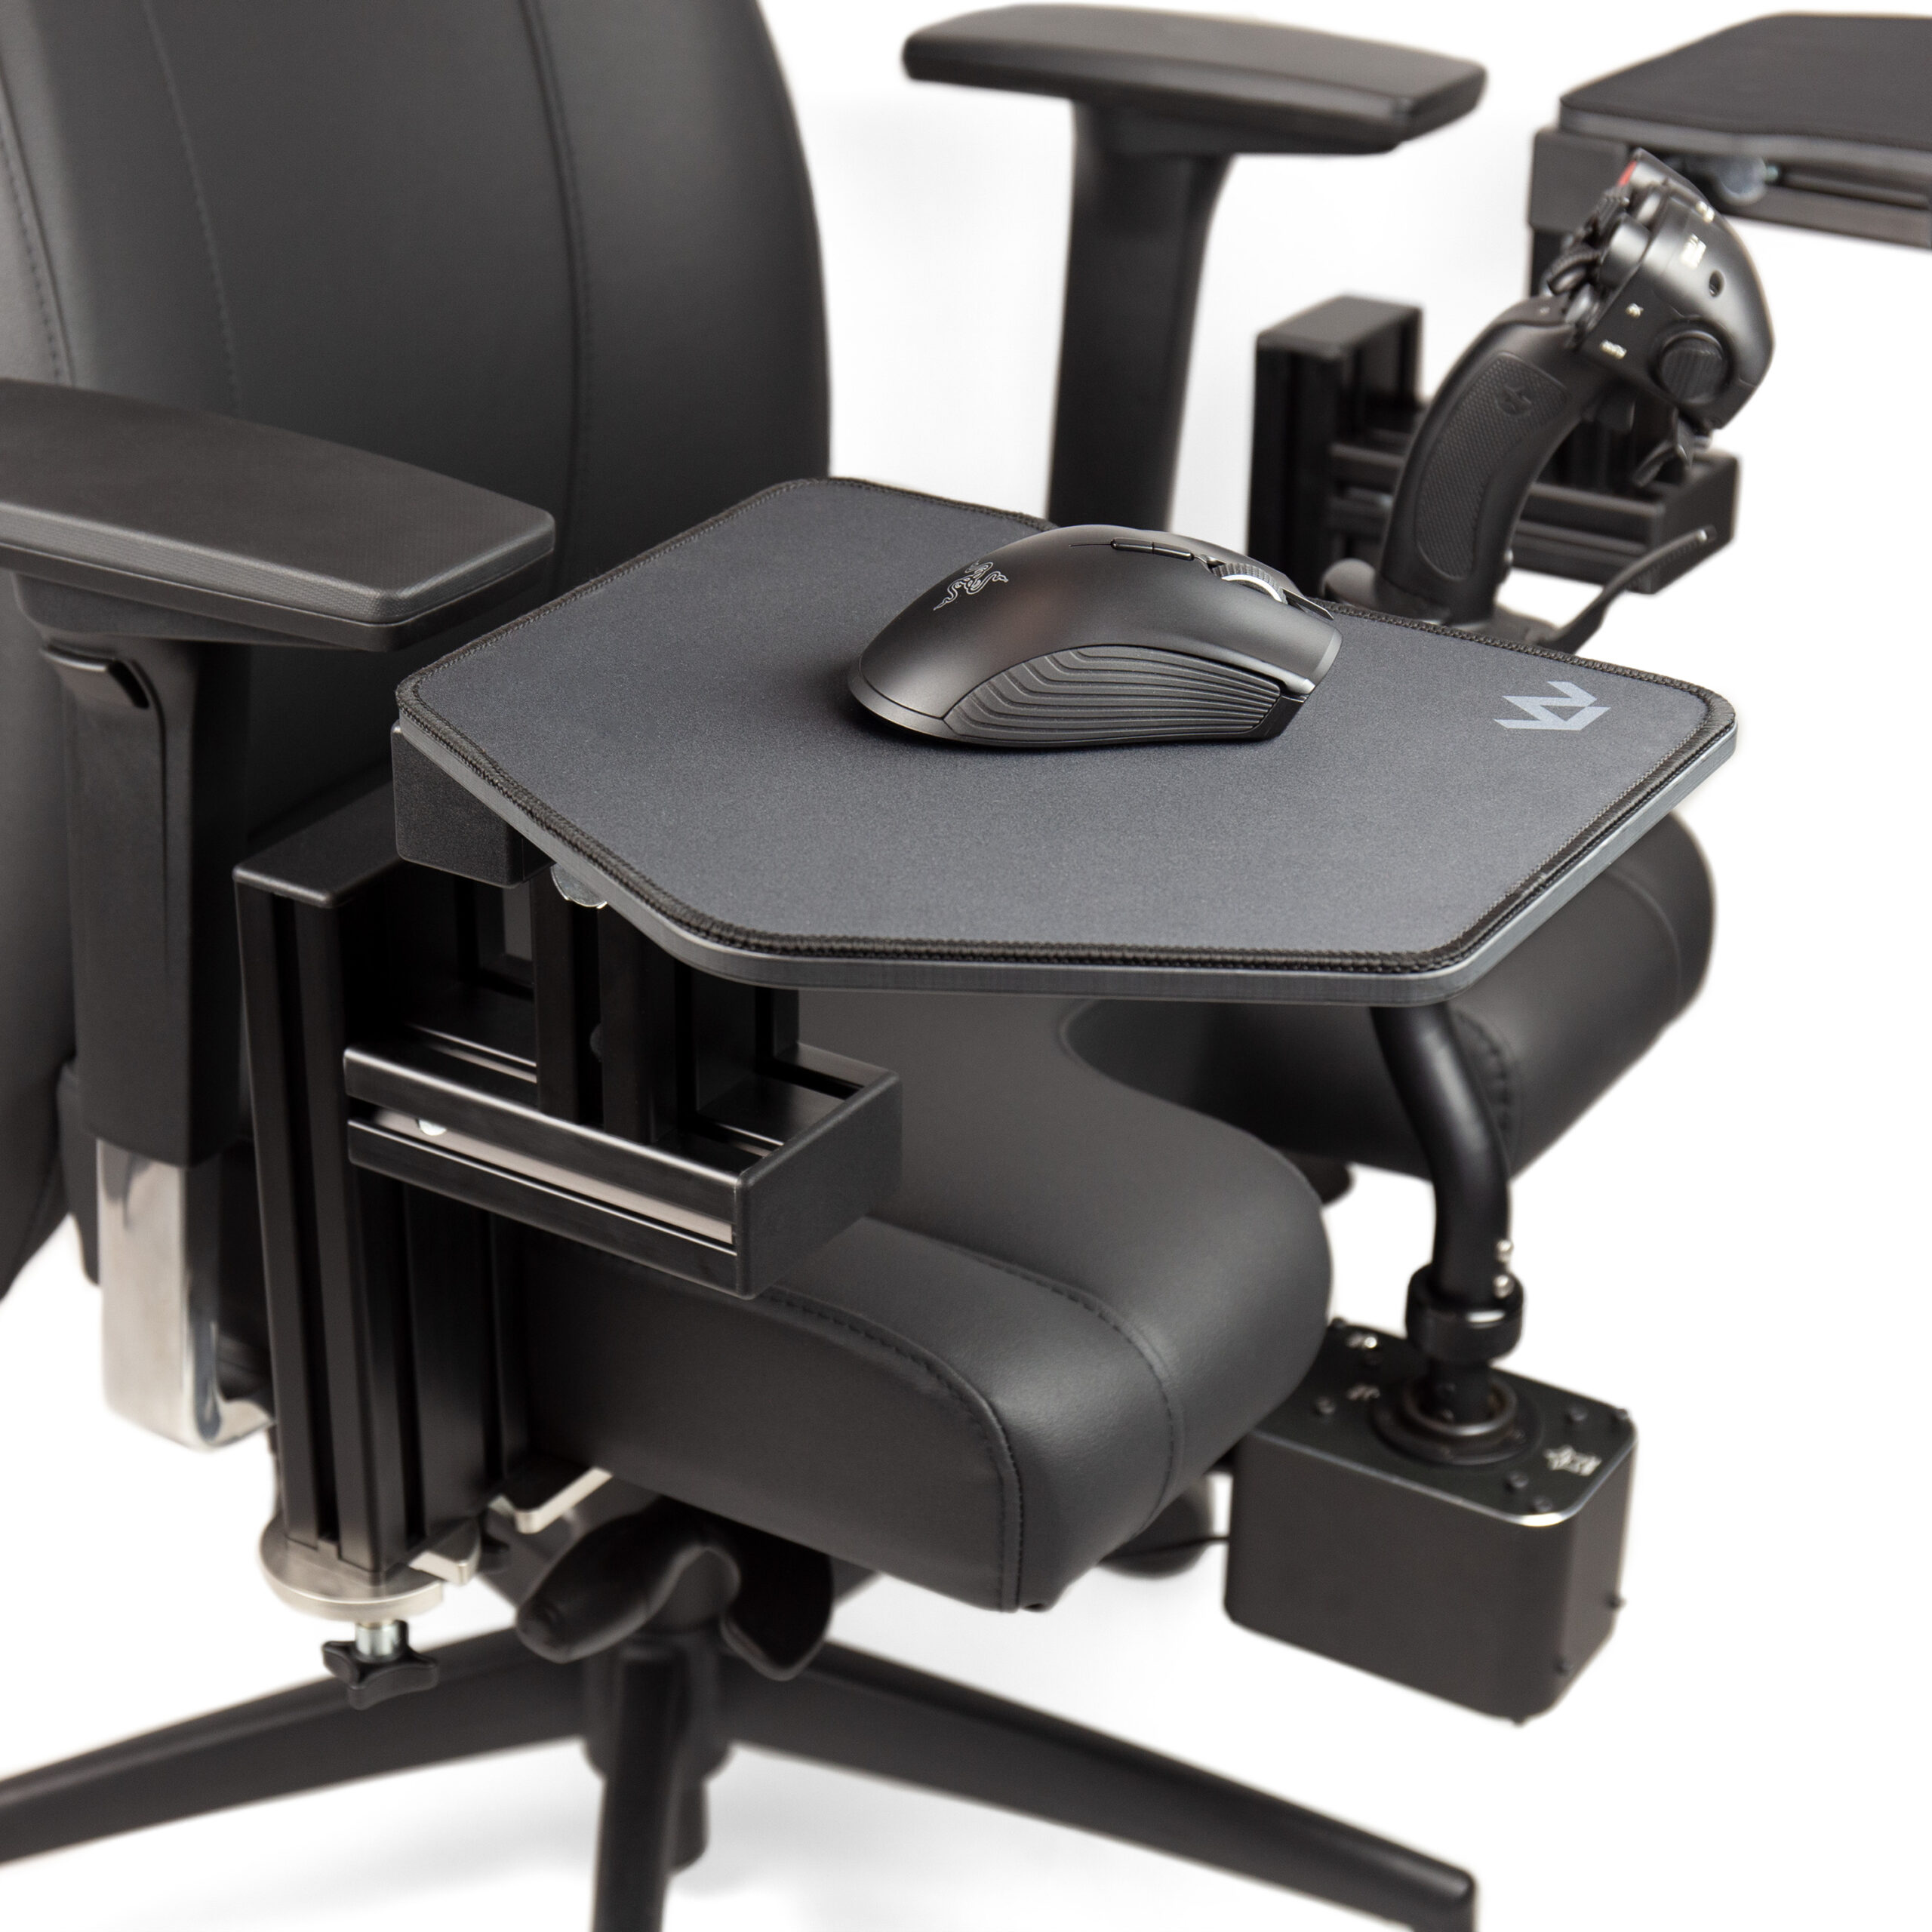 https://www.monster.tech/wp-content/uploads/2020/09/mtsim_chair_mount_mouse_right_01-1-scaled.jpg